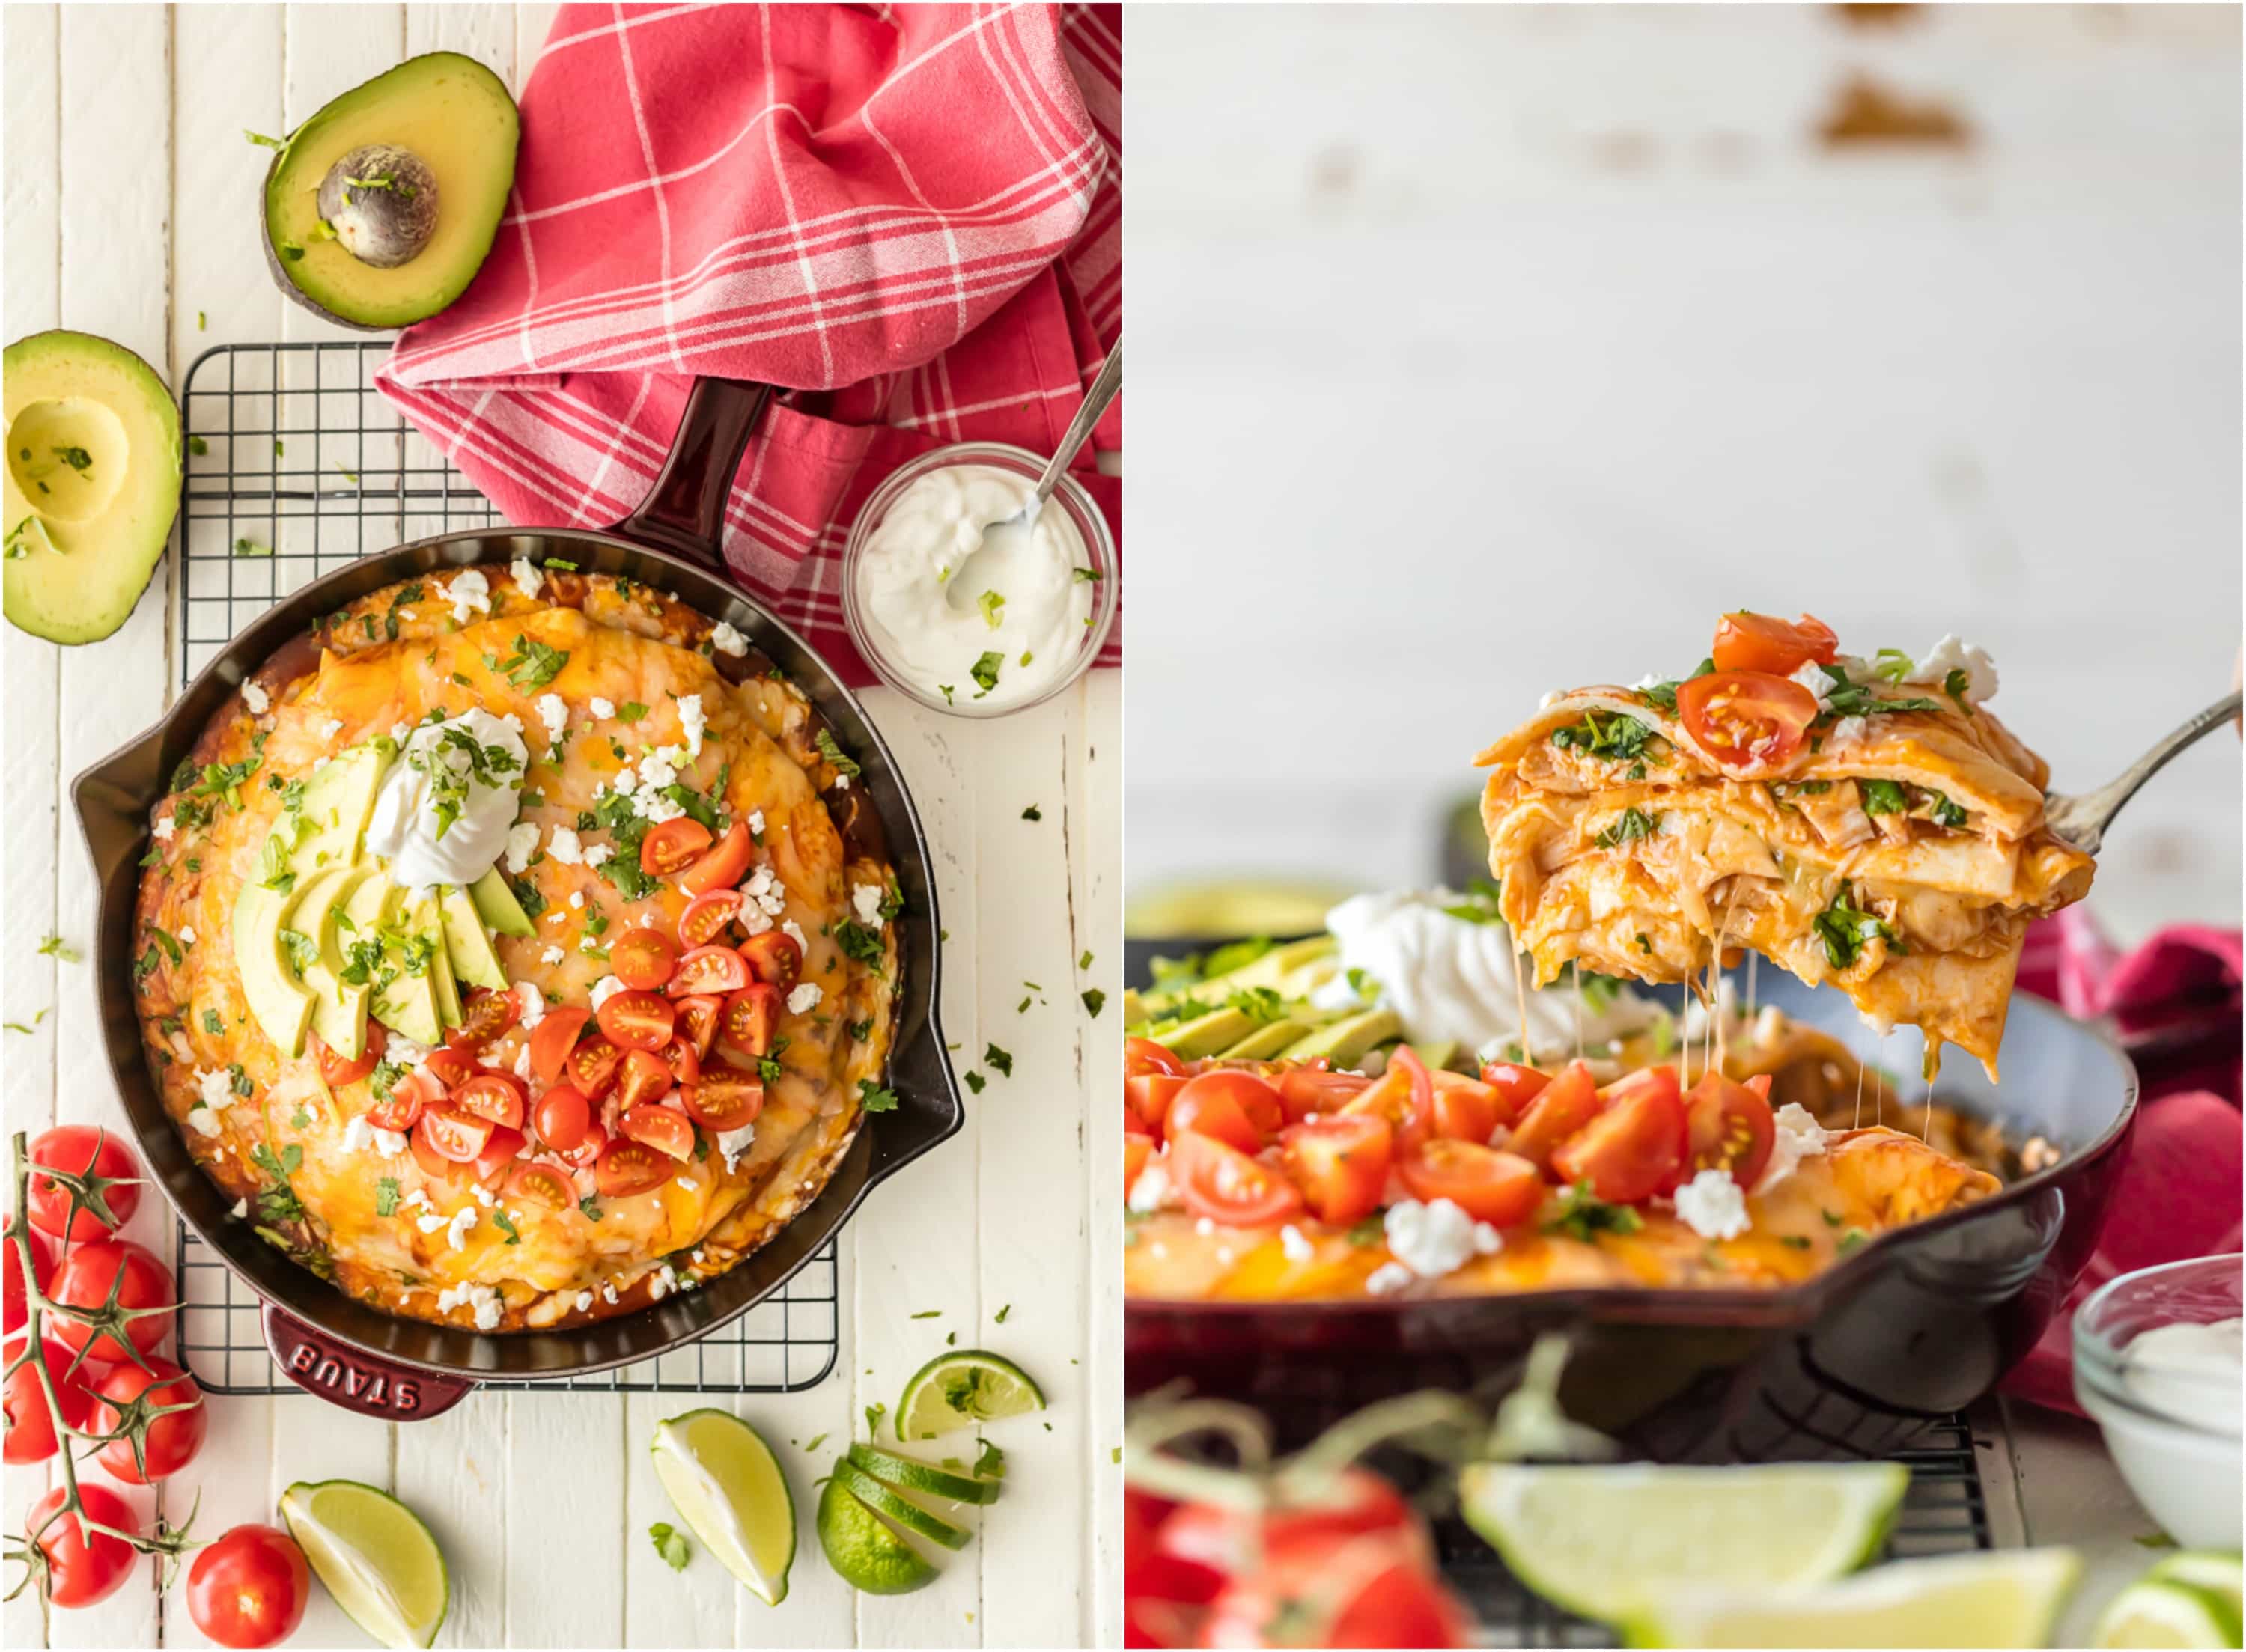 EASY DINNER ALERT! Chicken Enchilada Skillet Pie is made in my 25 minutes and will satisfy the entire family. Flour tortillas layered with spicy chicken, enchilada sauce, and lots of cheese. Easy and delicious dinner perfect for busy nights.